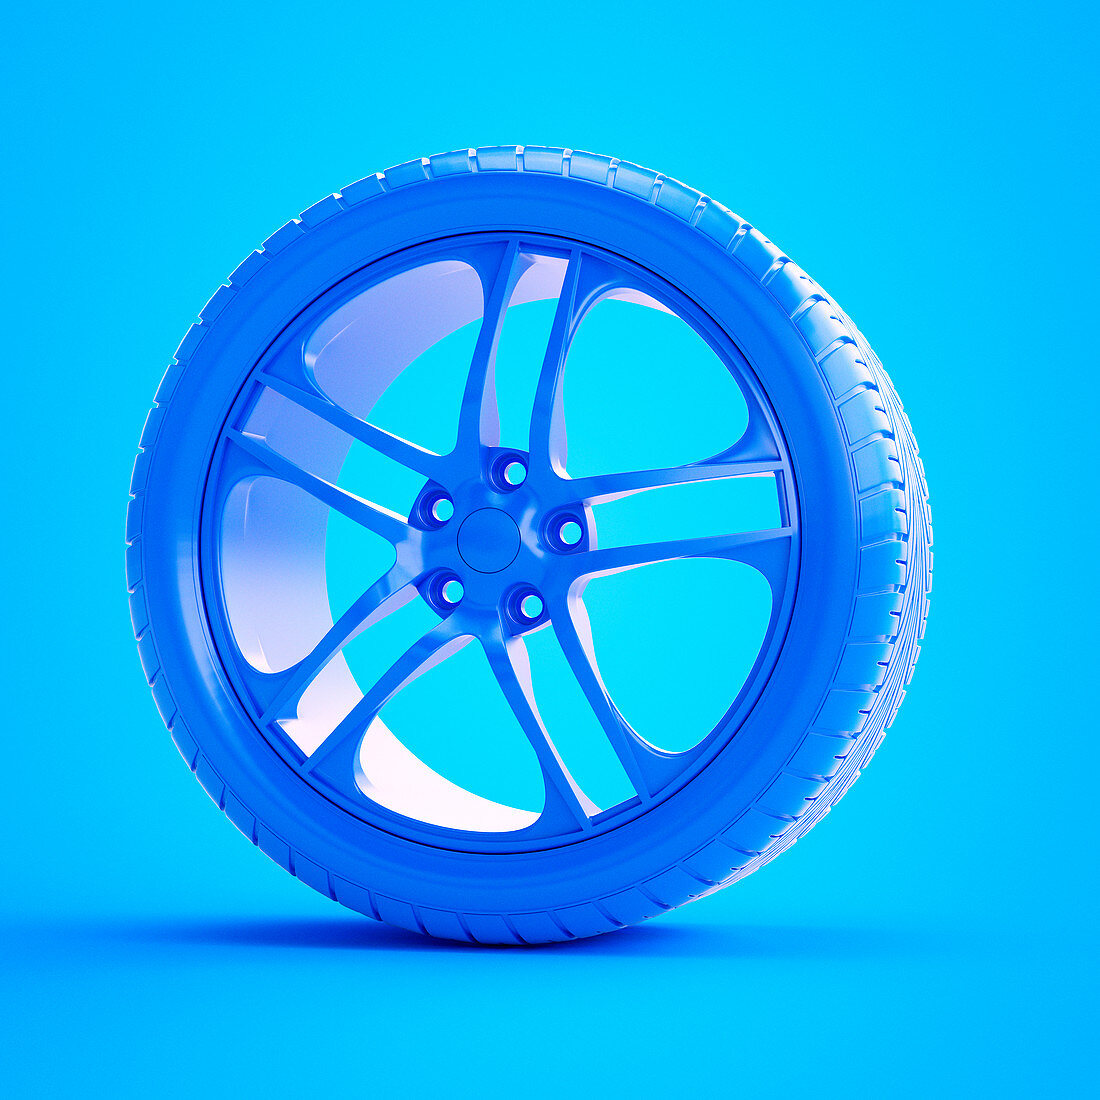 Illustration of a blue tyre